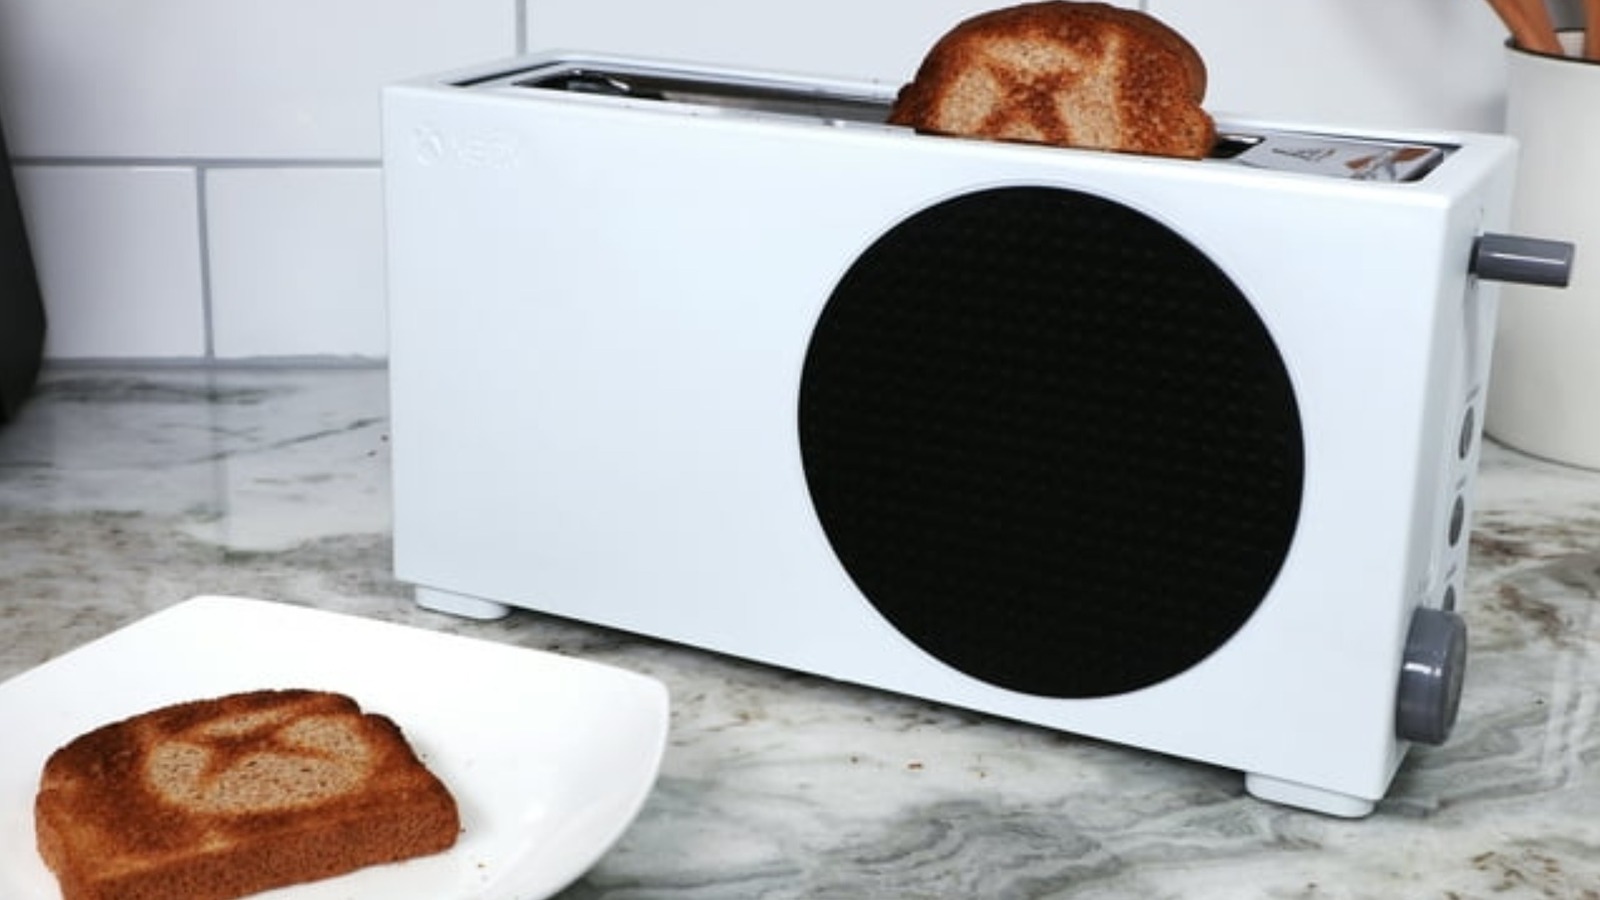 (This Xbox Toaster Might Be The Strangest Microsoft Product You Can Actually Buy) Melbet